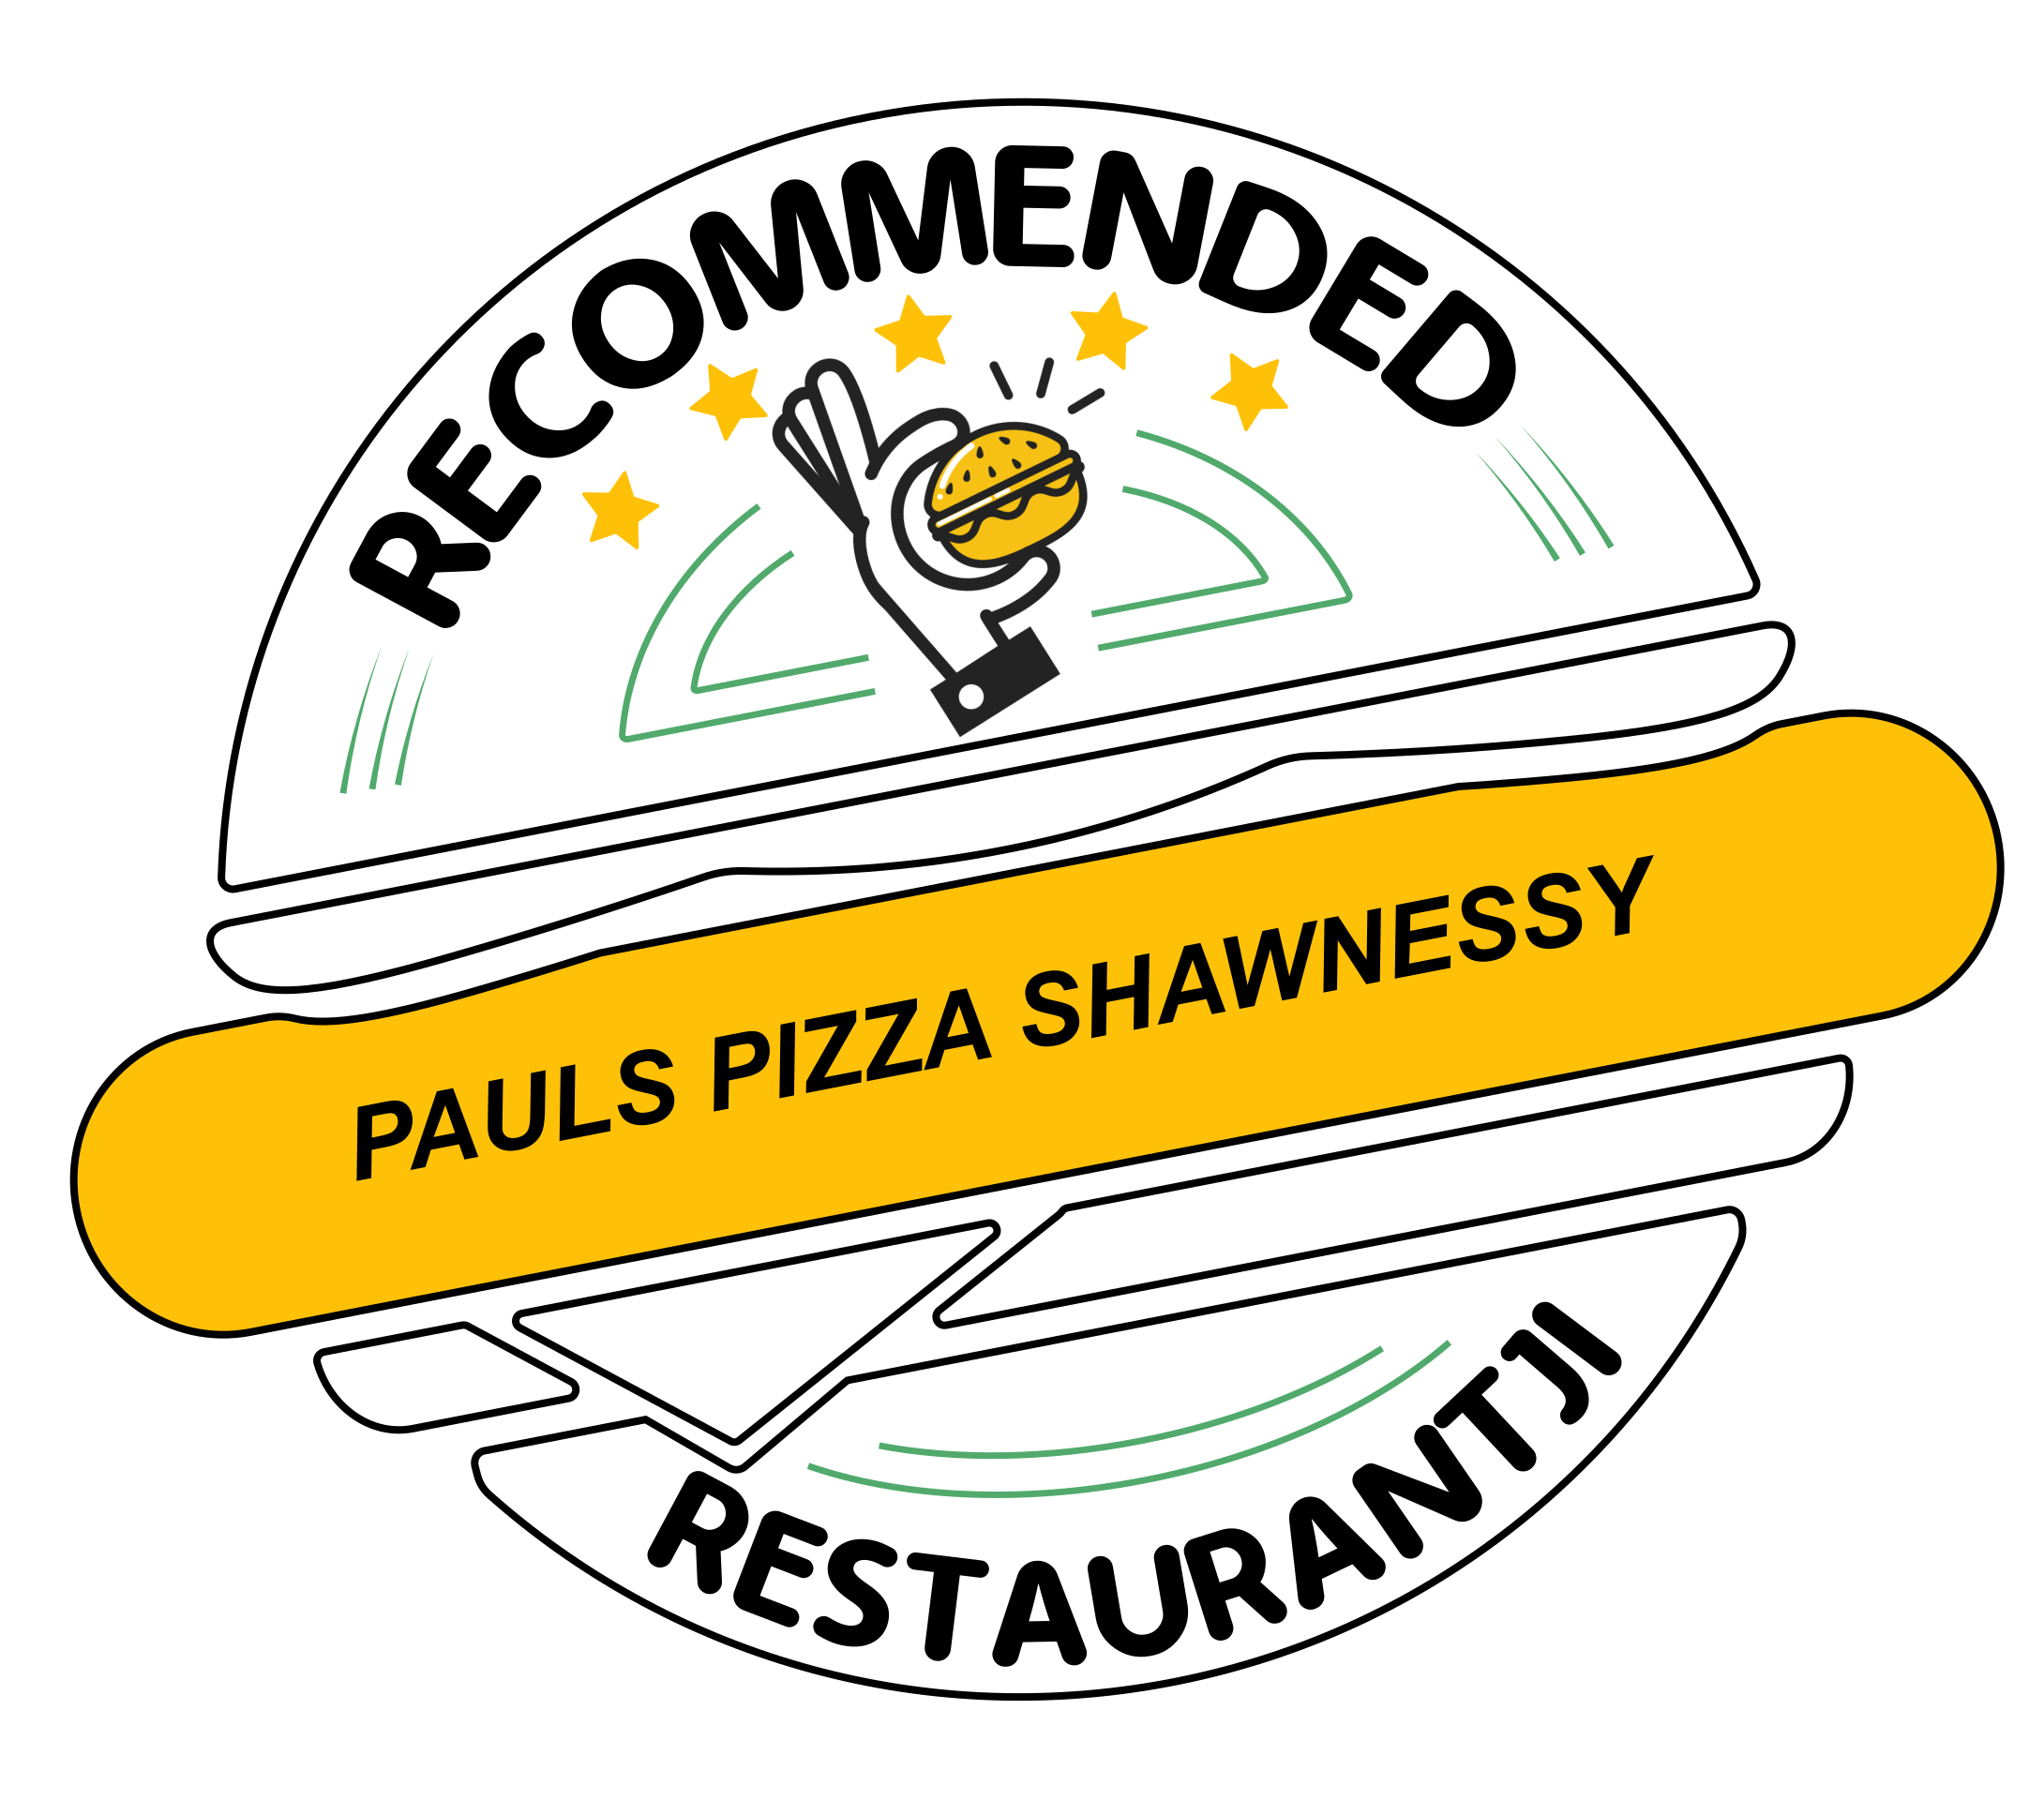 Pauls Pizza Shawnessy has earned accolades from Restaurantji - a user-friendly platform for discovering the finest local restaurants.